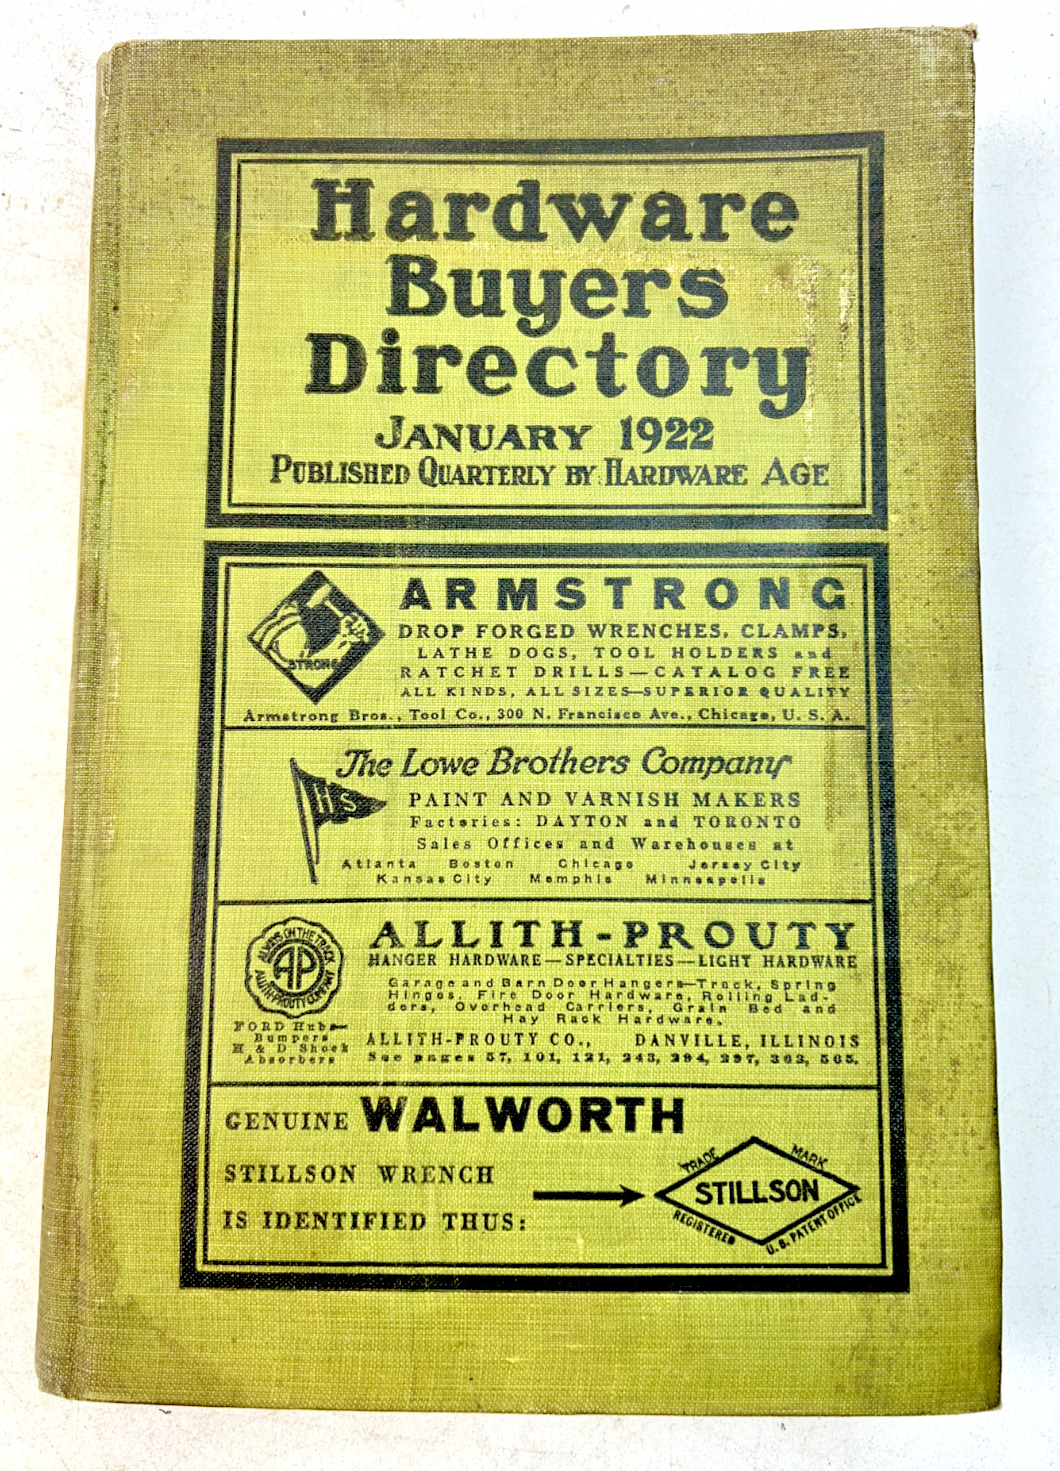 Antique 1922 Hardware Buyers Directory by Hardware Age